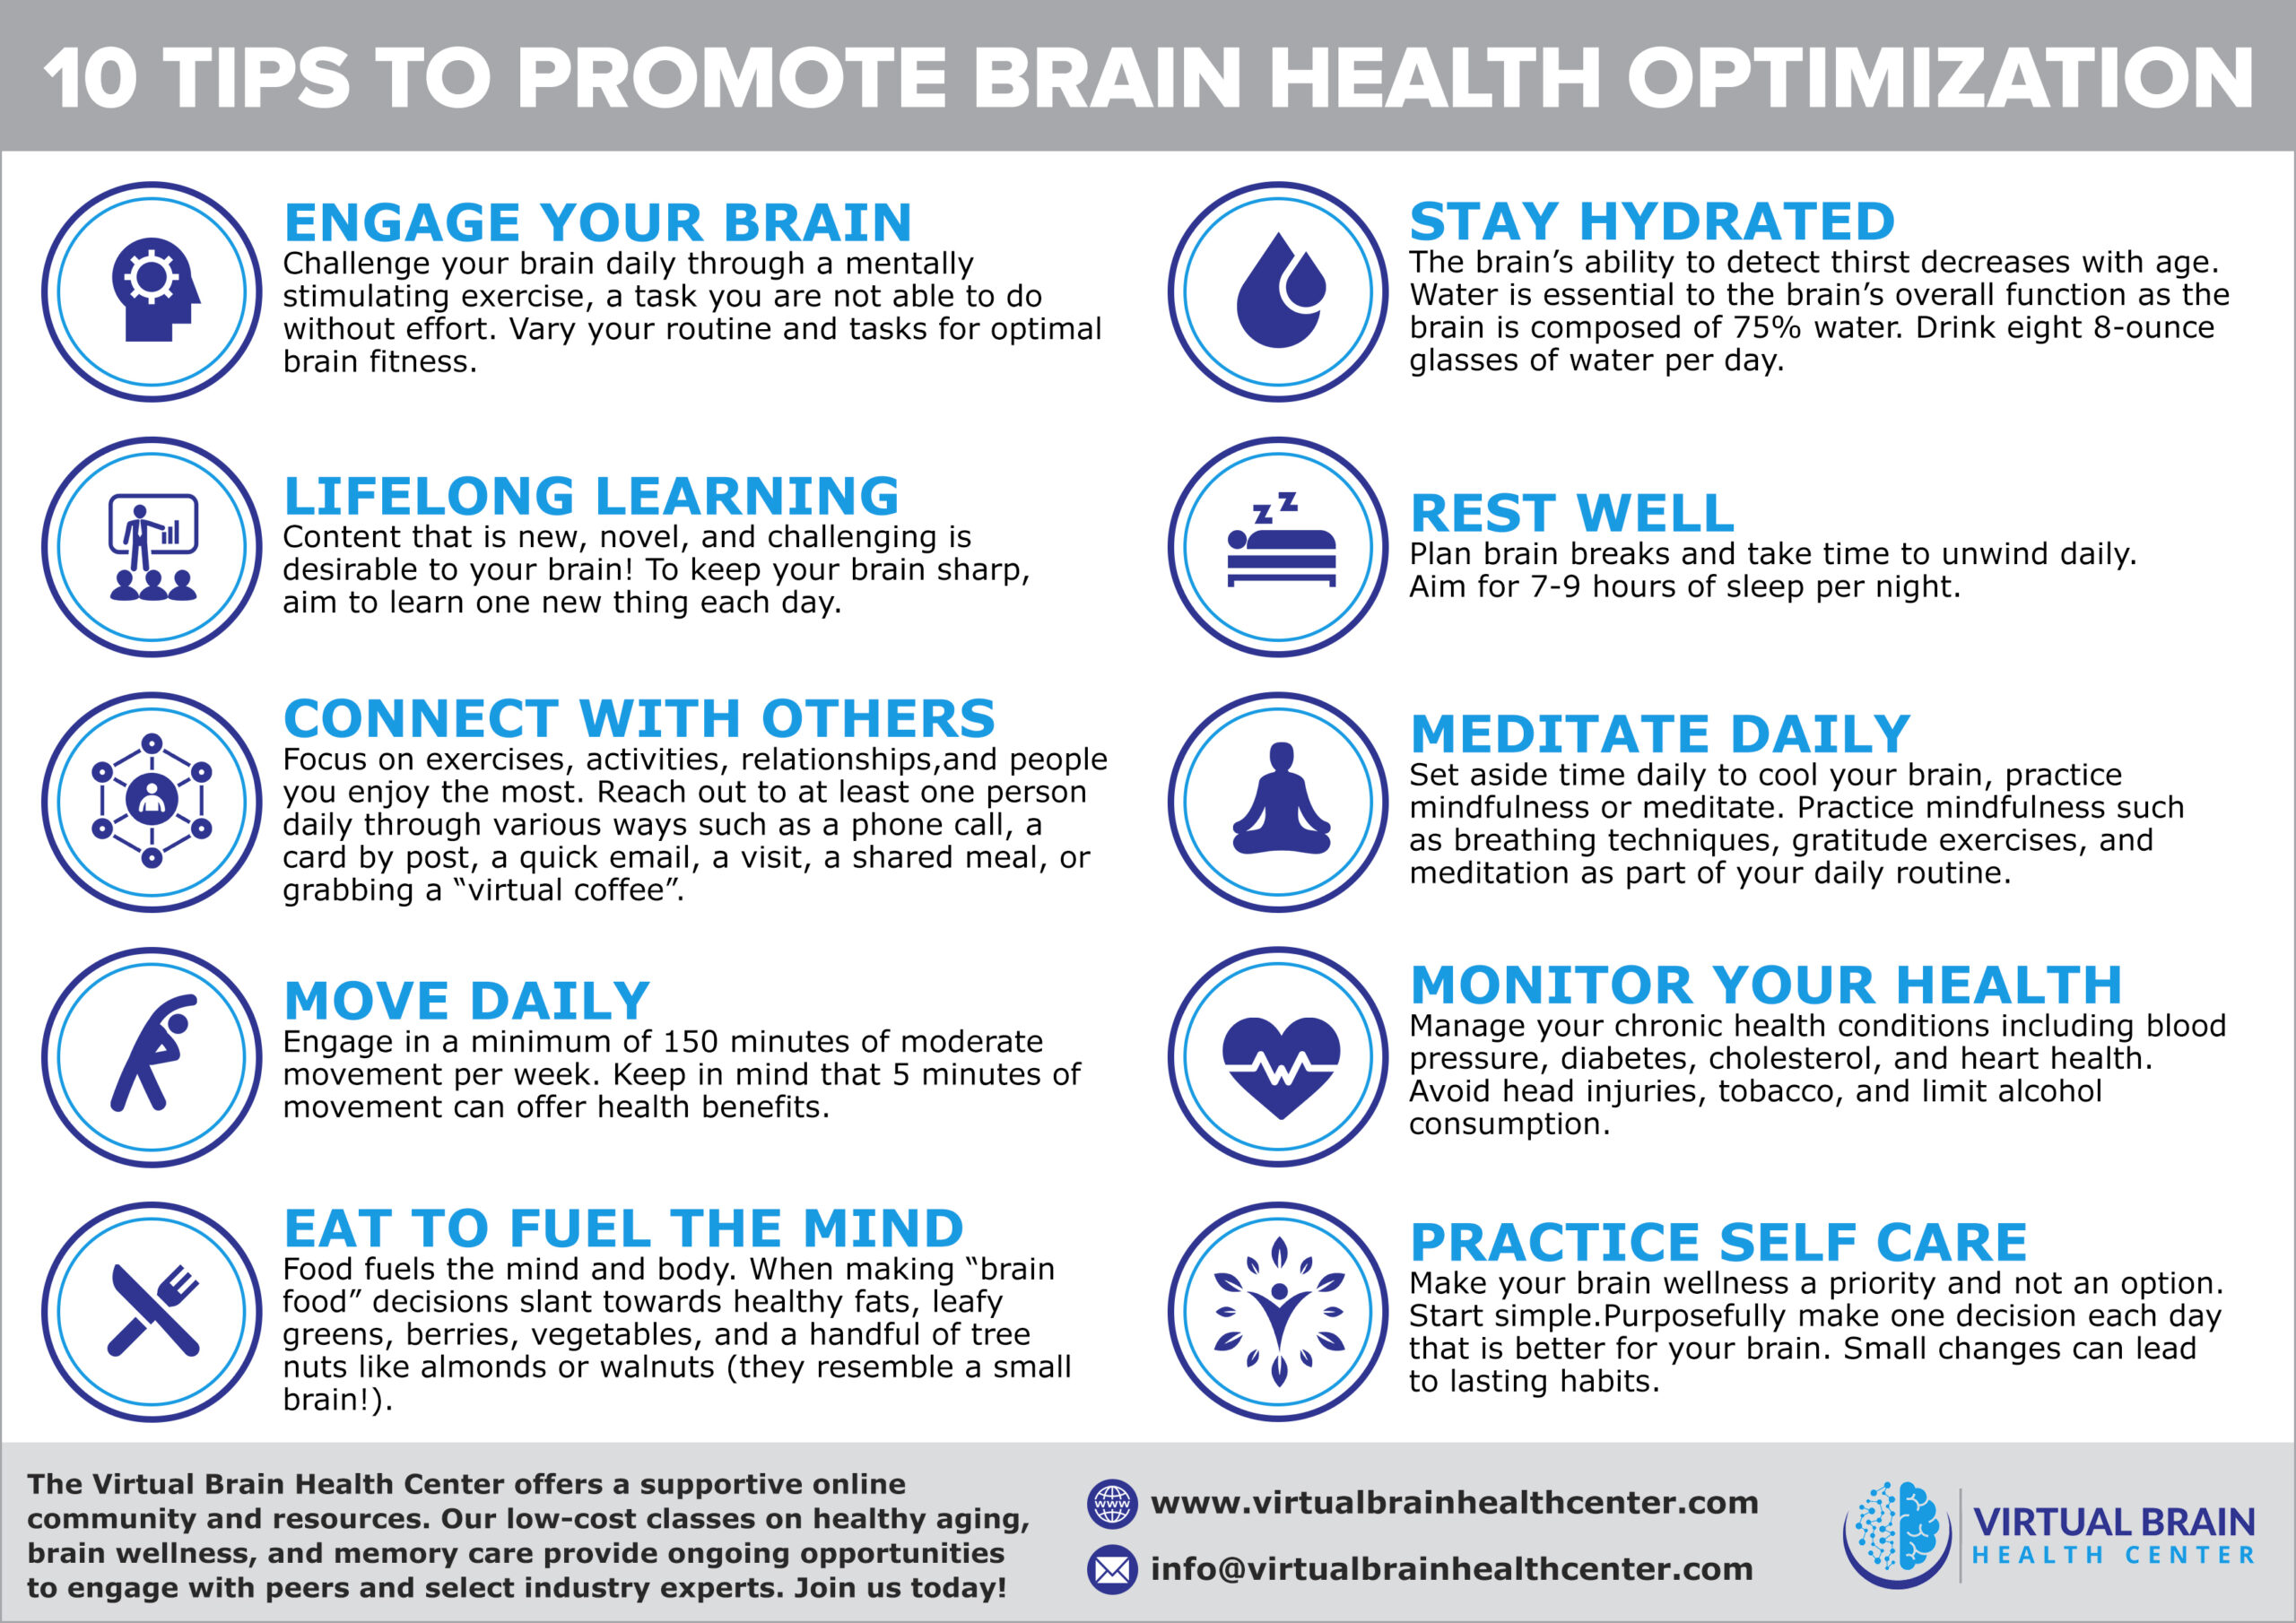 10 Tips to Promote Brain Health Optimization 03 copy scaled